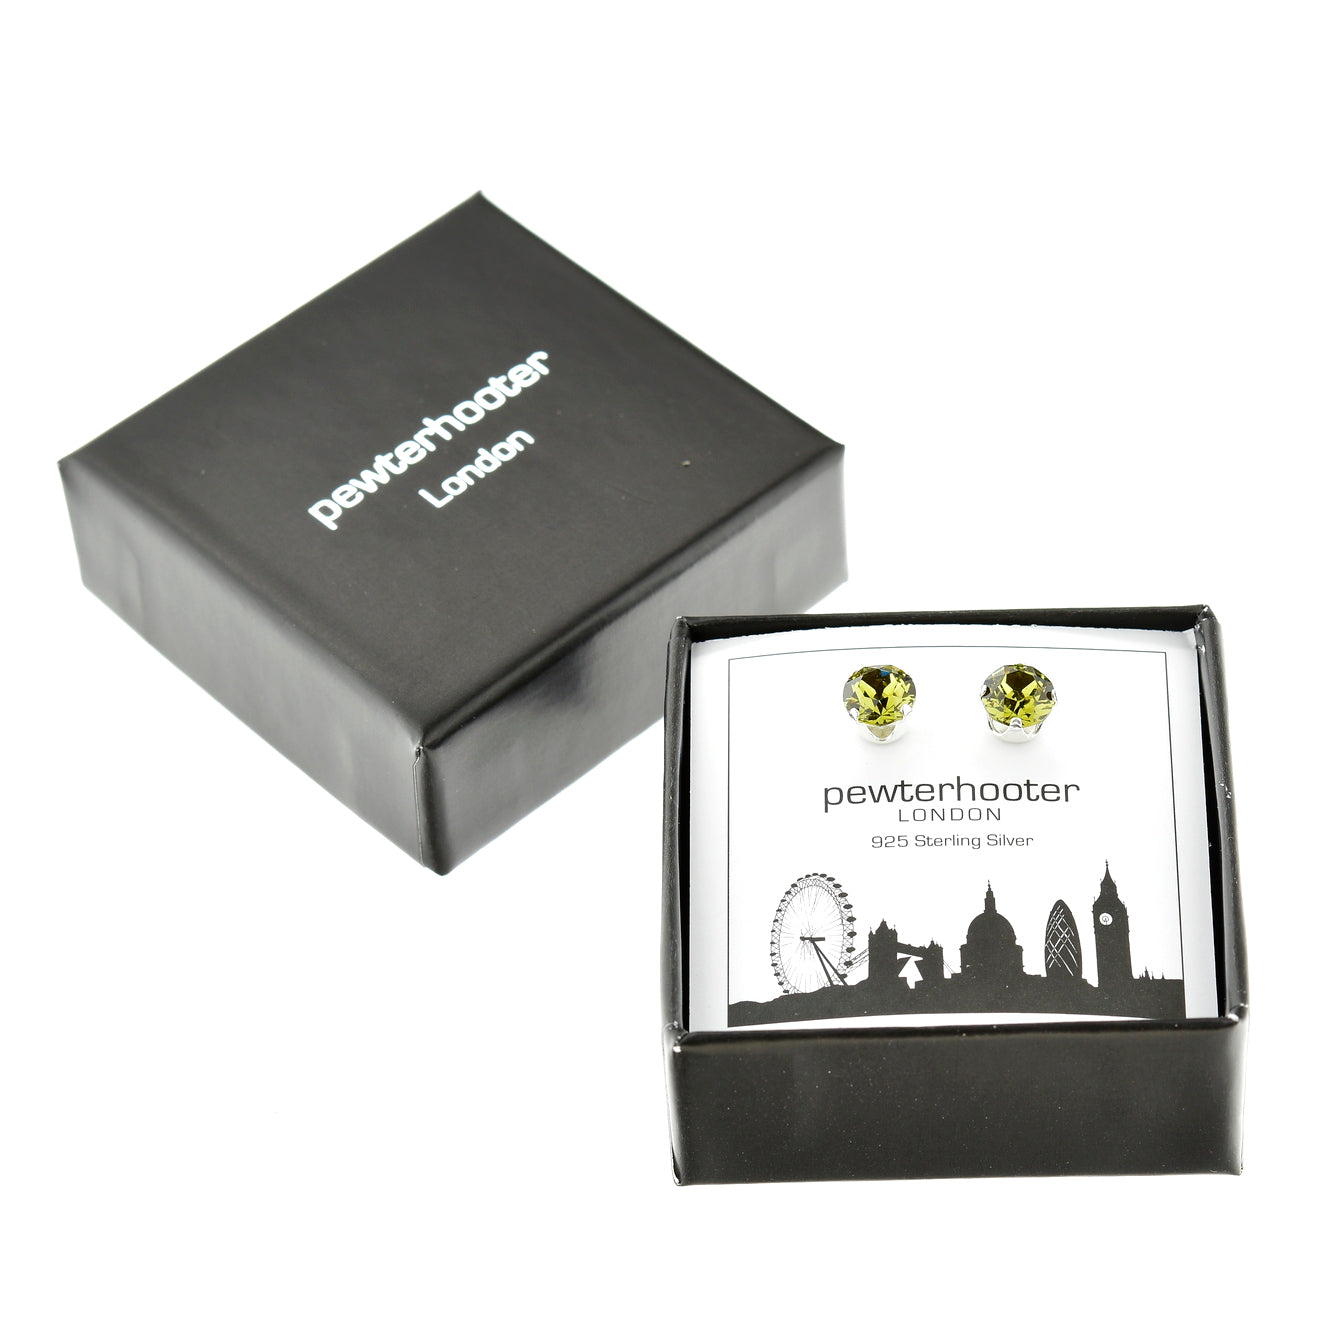 pewterhooter® Women's Classic Collection 925 Sterling silver earrings with sparkling Khaki Green crystals, packaged in a gift box for any occasion.